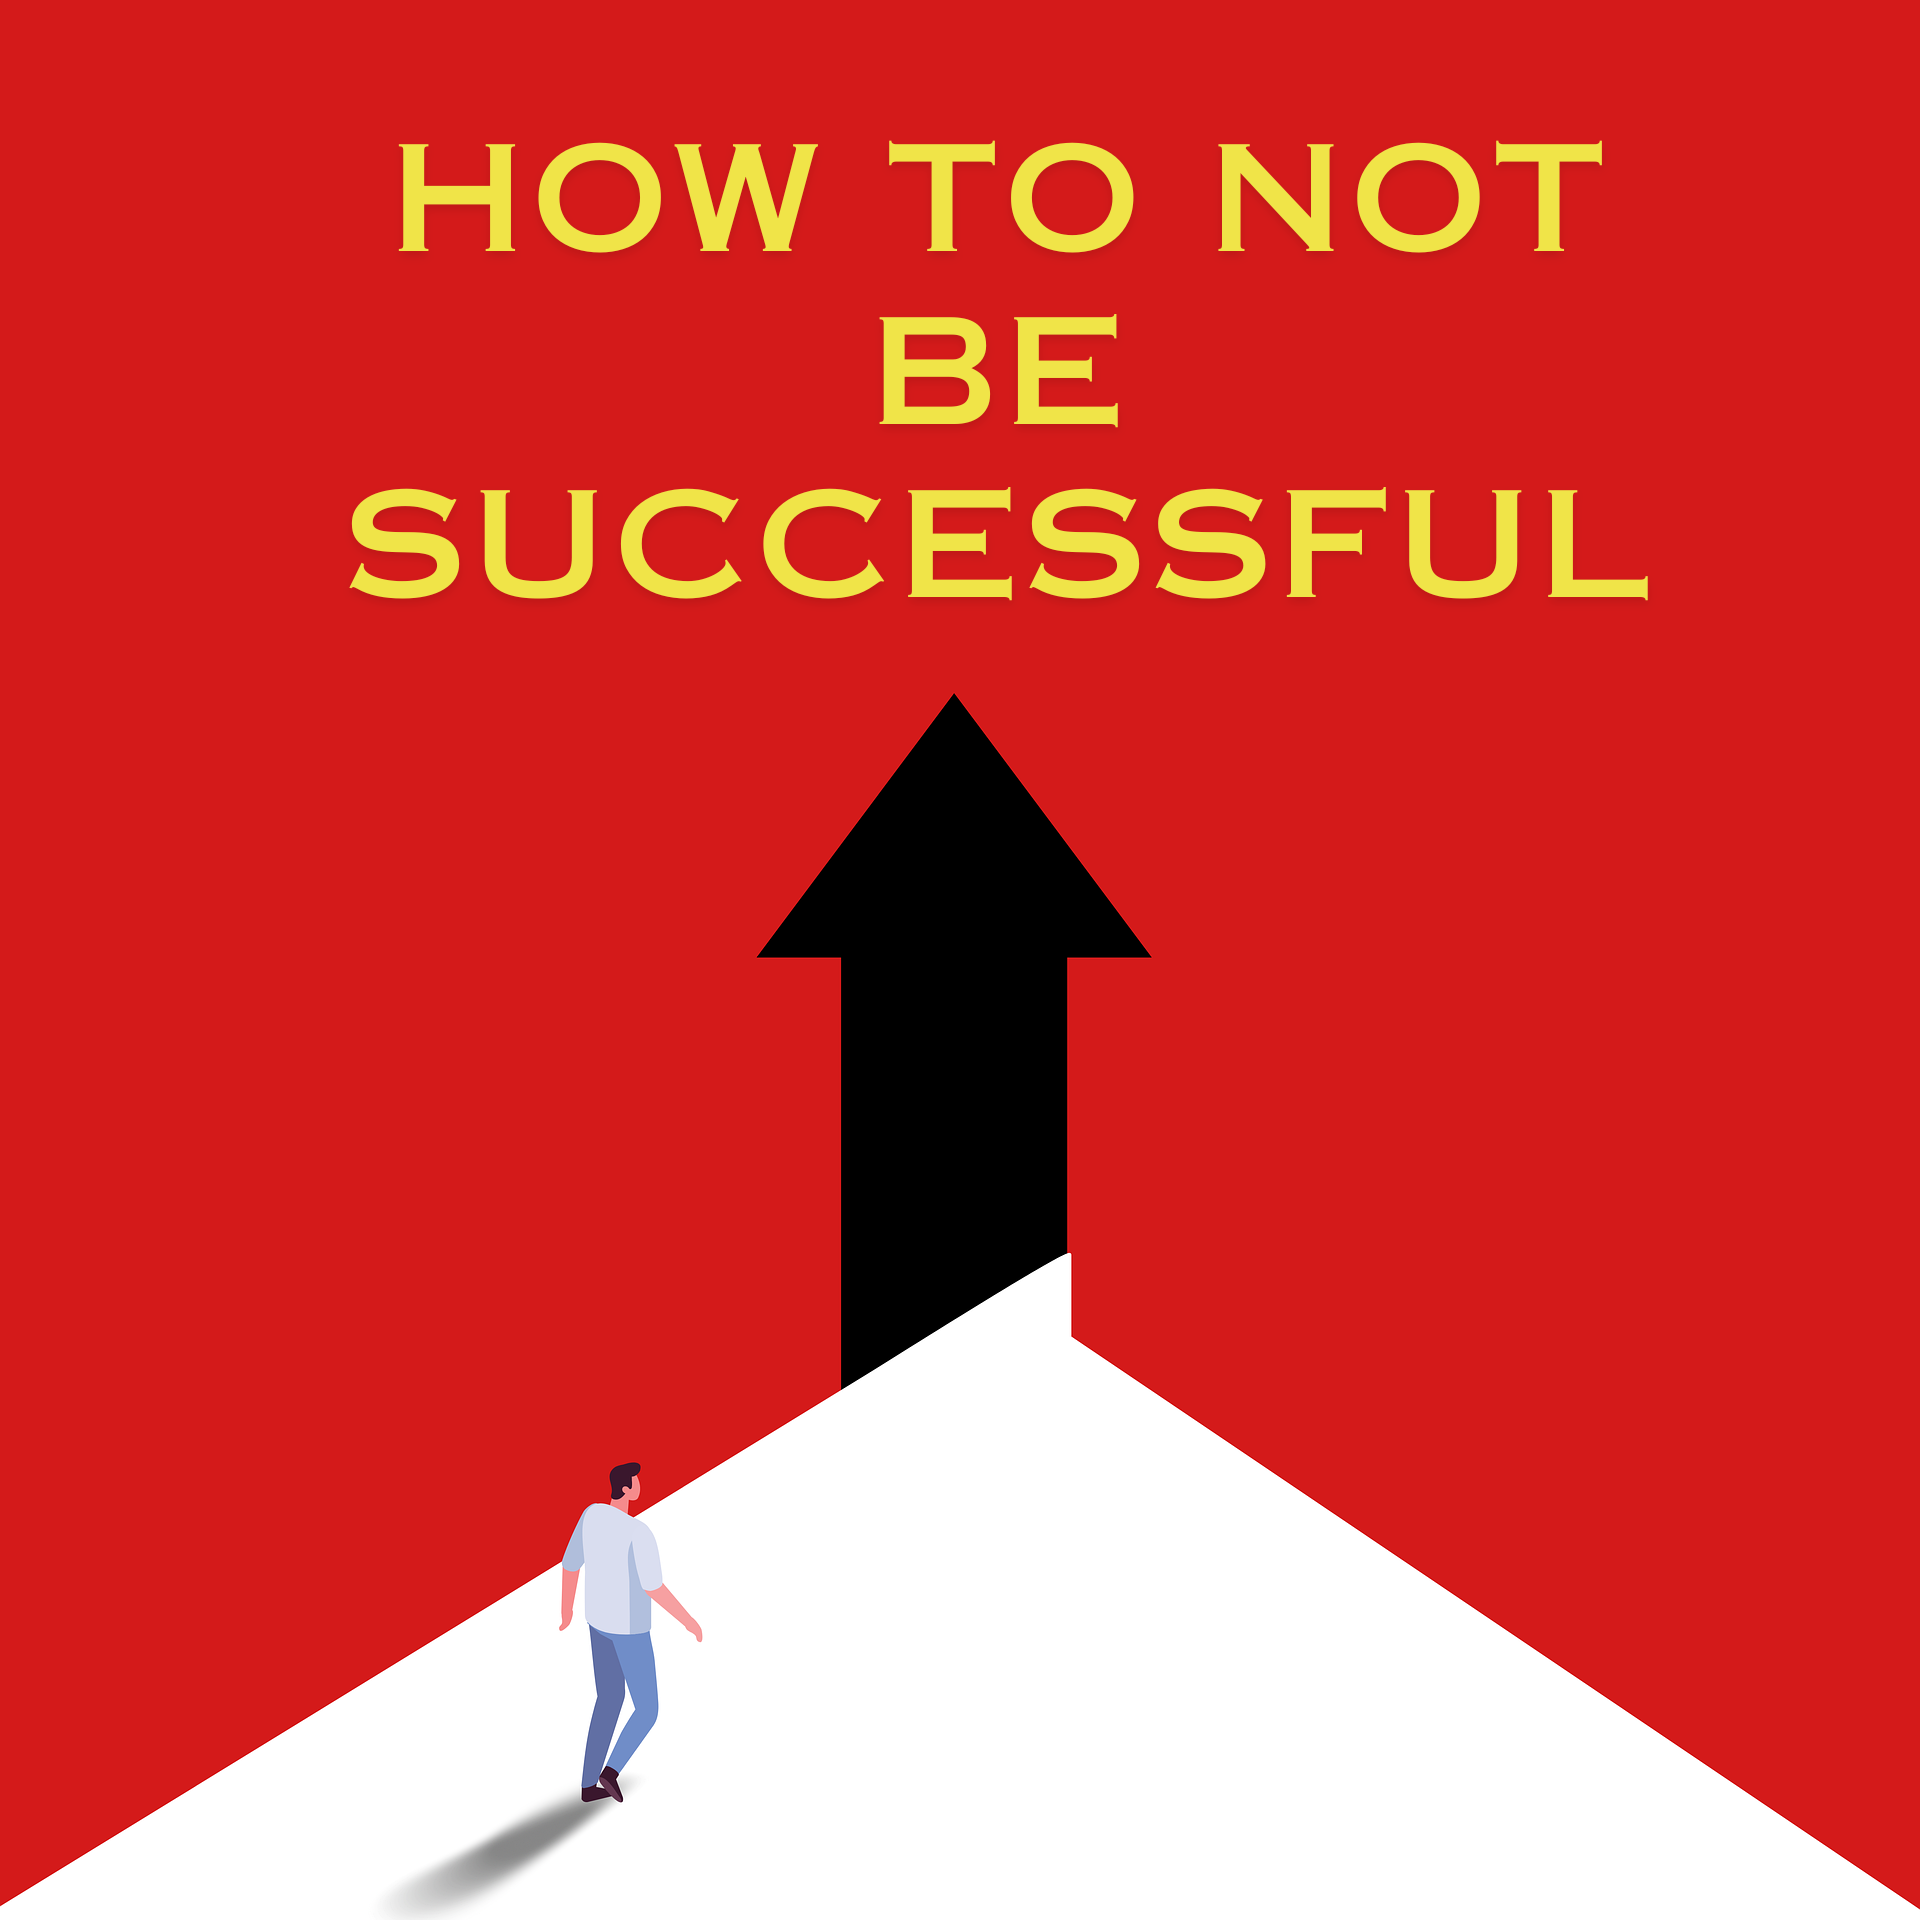 How to be Successful (Not)